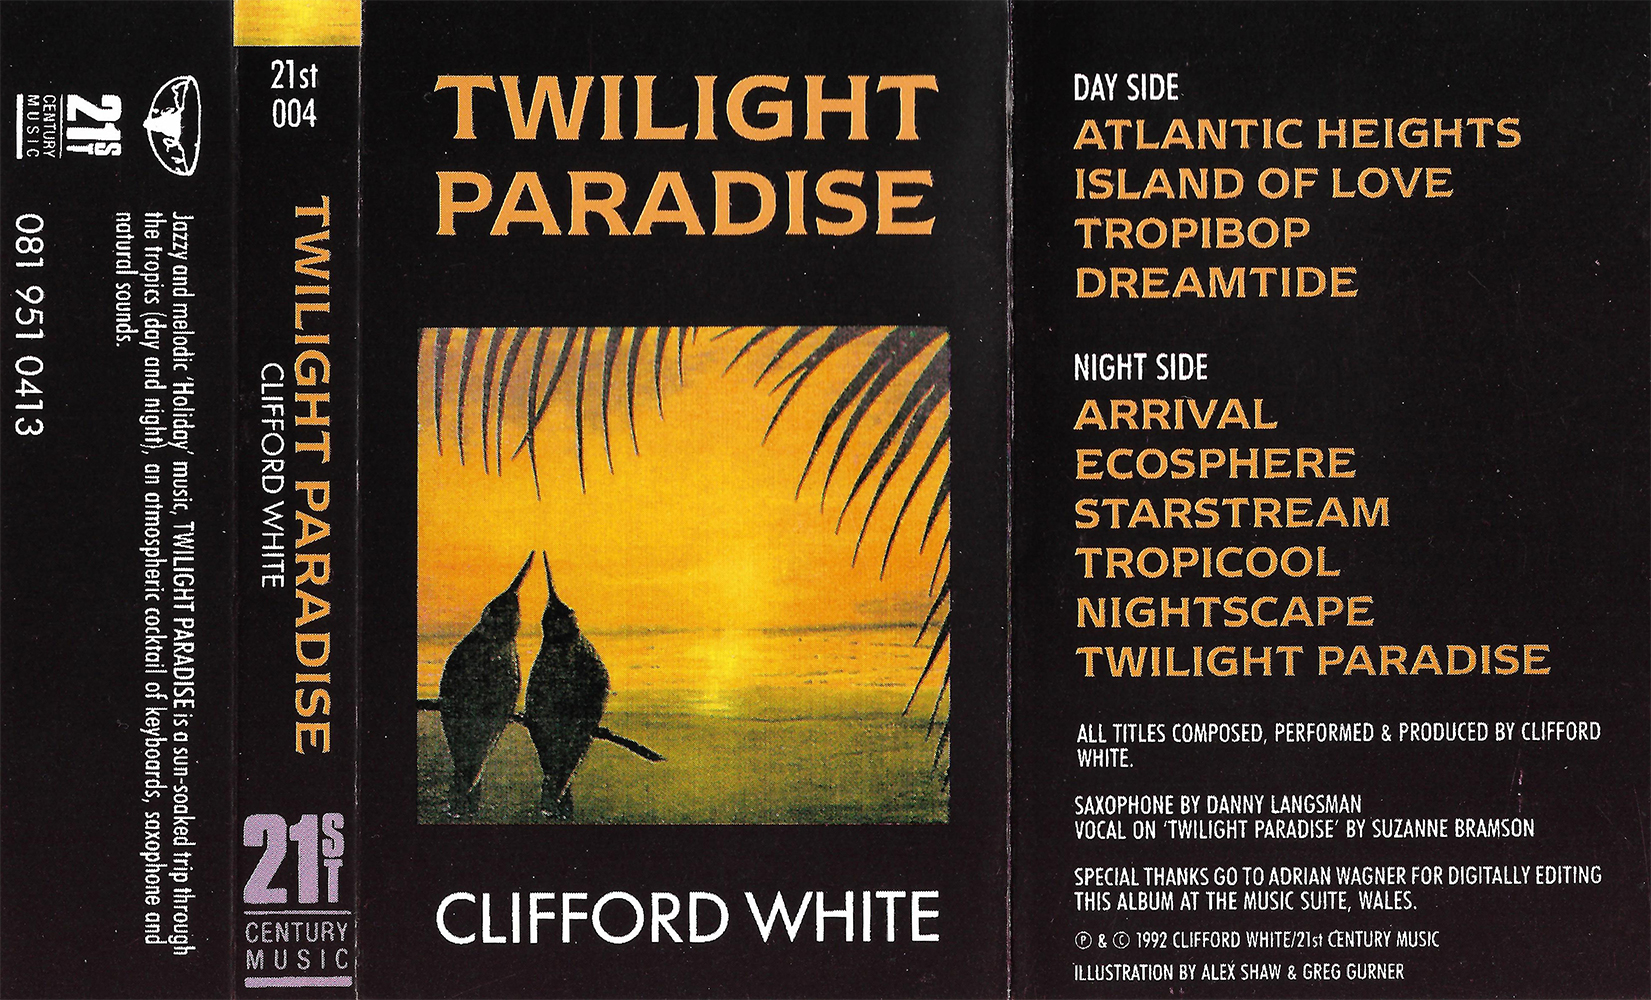 Twilight Paradise by Clifford White